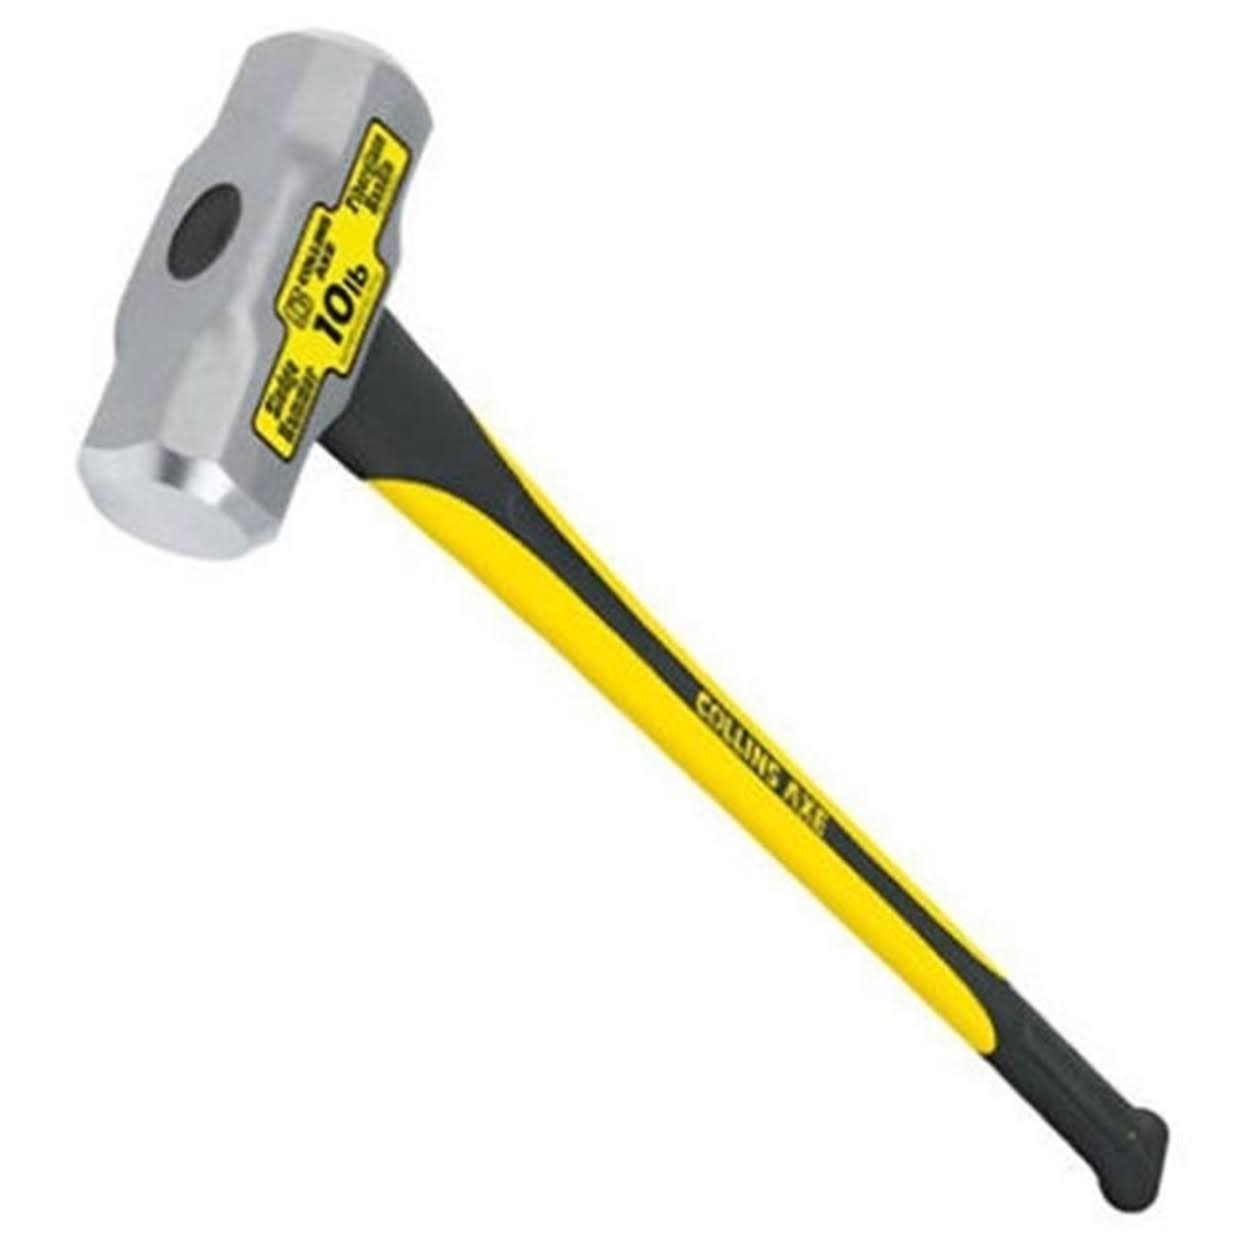 Collins Sledge Hammer - Double Face, Drop Forged, Heat Treated, 10lb, Fiberglass, 34"